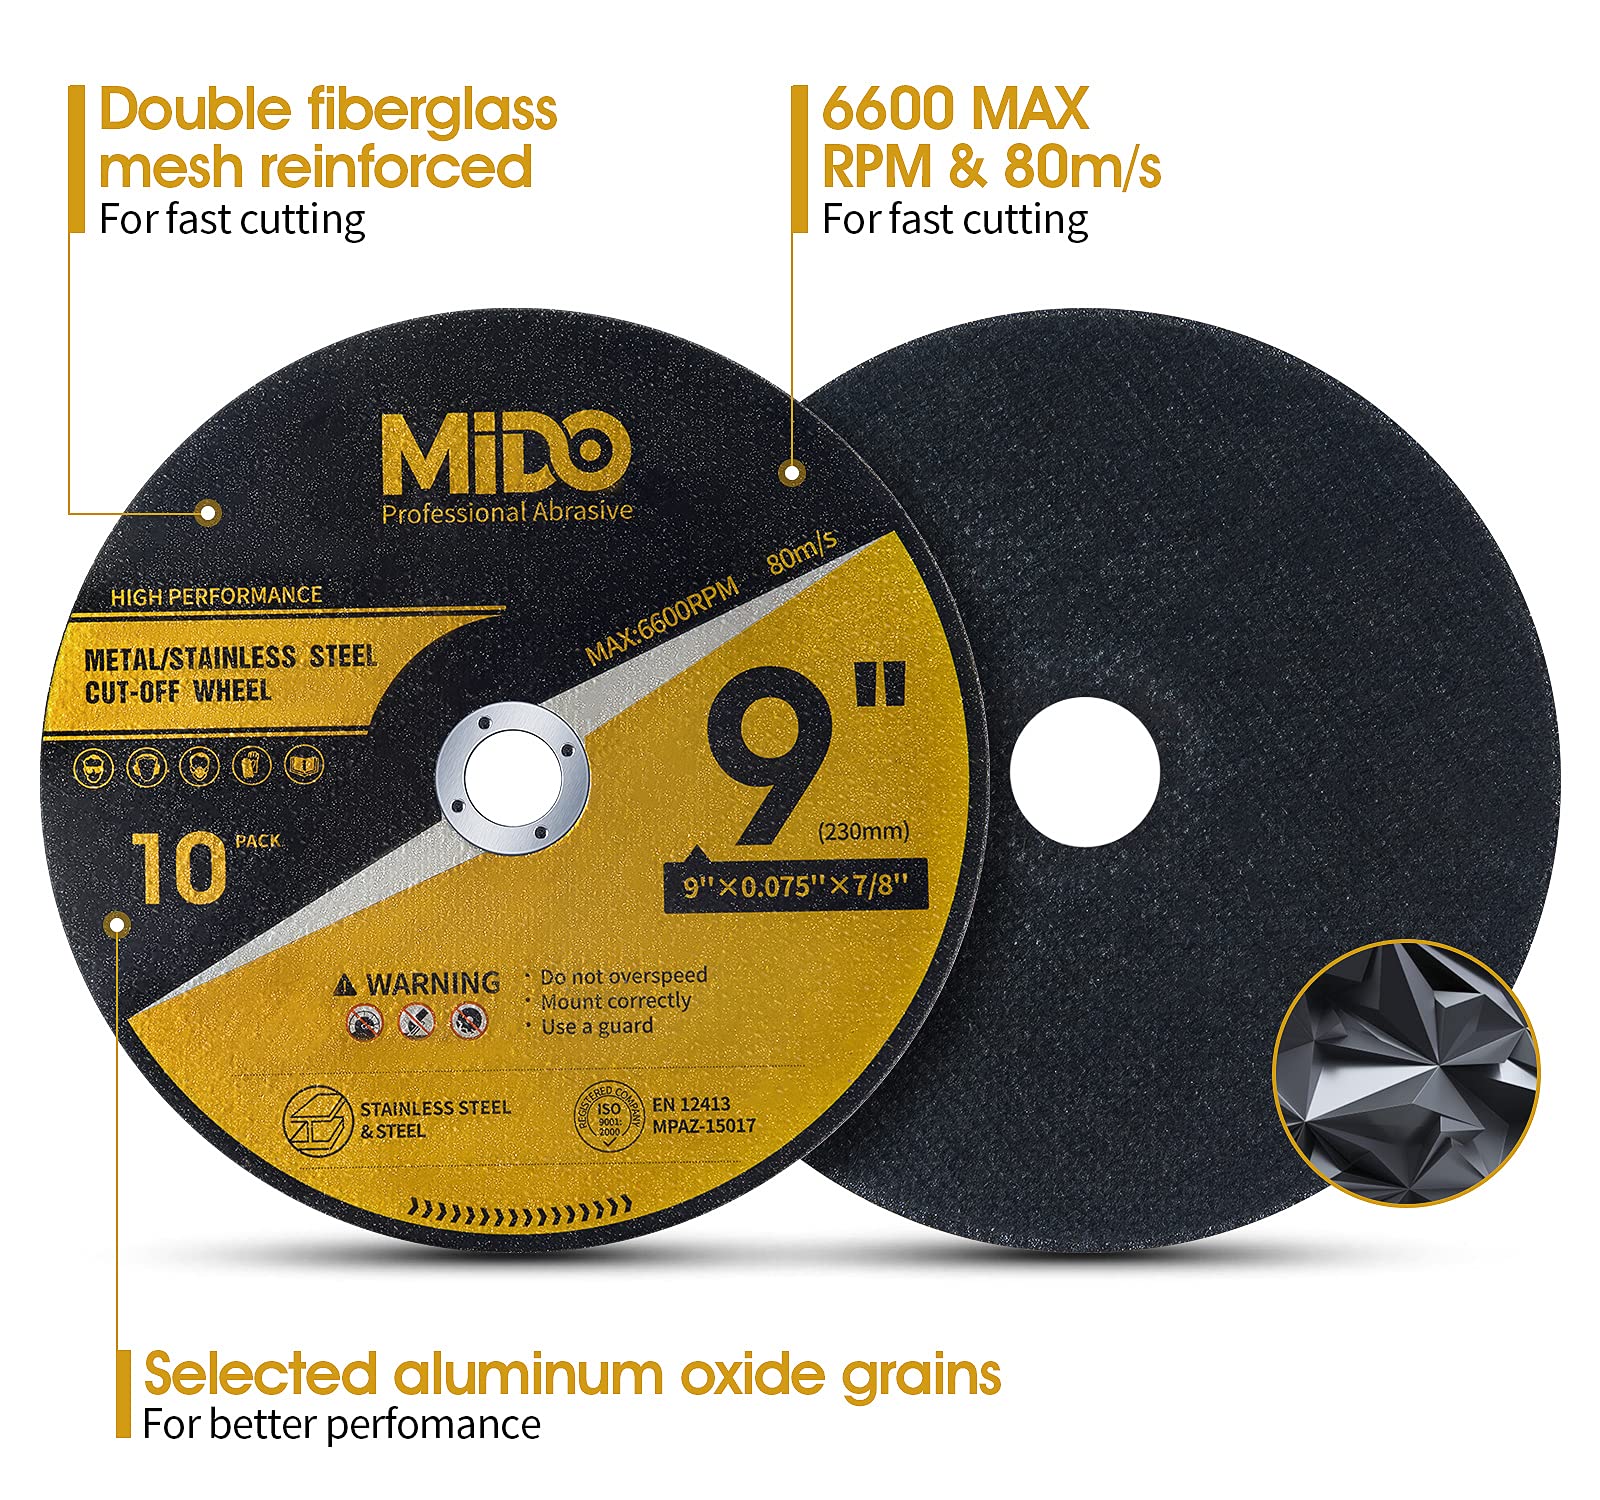 MIDO Professional Abrasive 10 Pack Cut Off Wheels 9 Inch Cutting Wheel 9” x .075” x 7/8” Metal&Stainless Steel Cutting Disc Fit for Angle Grinder